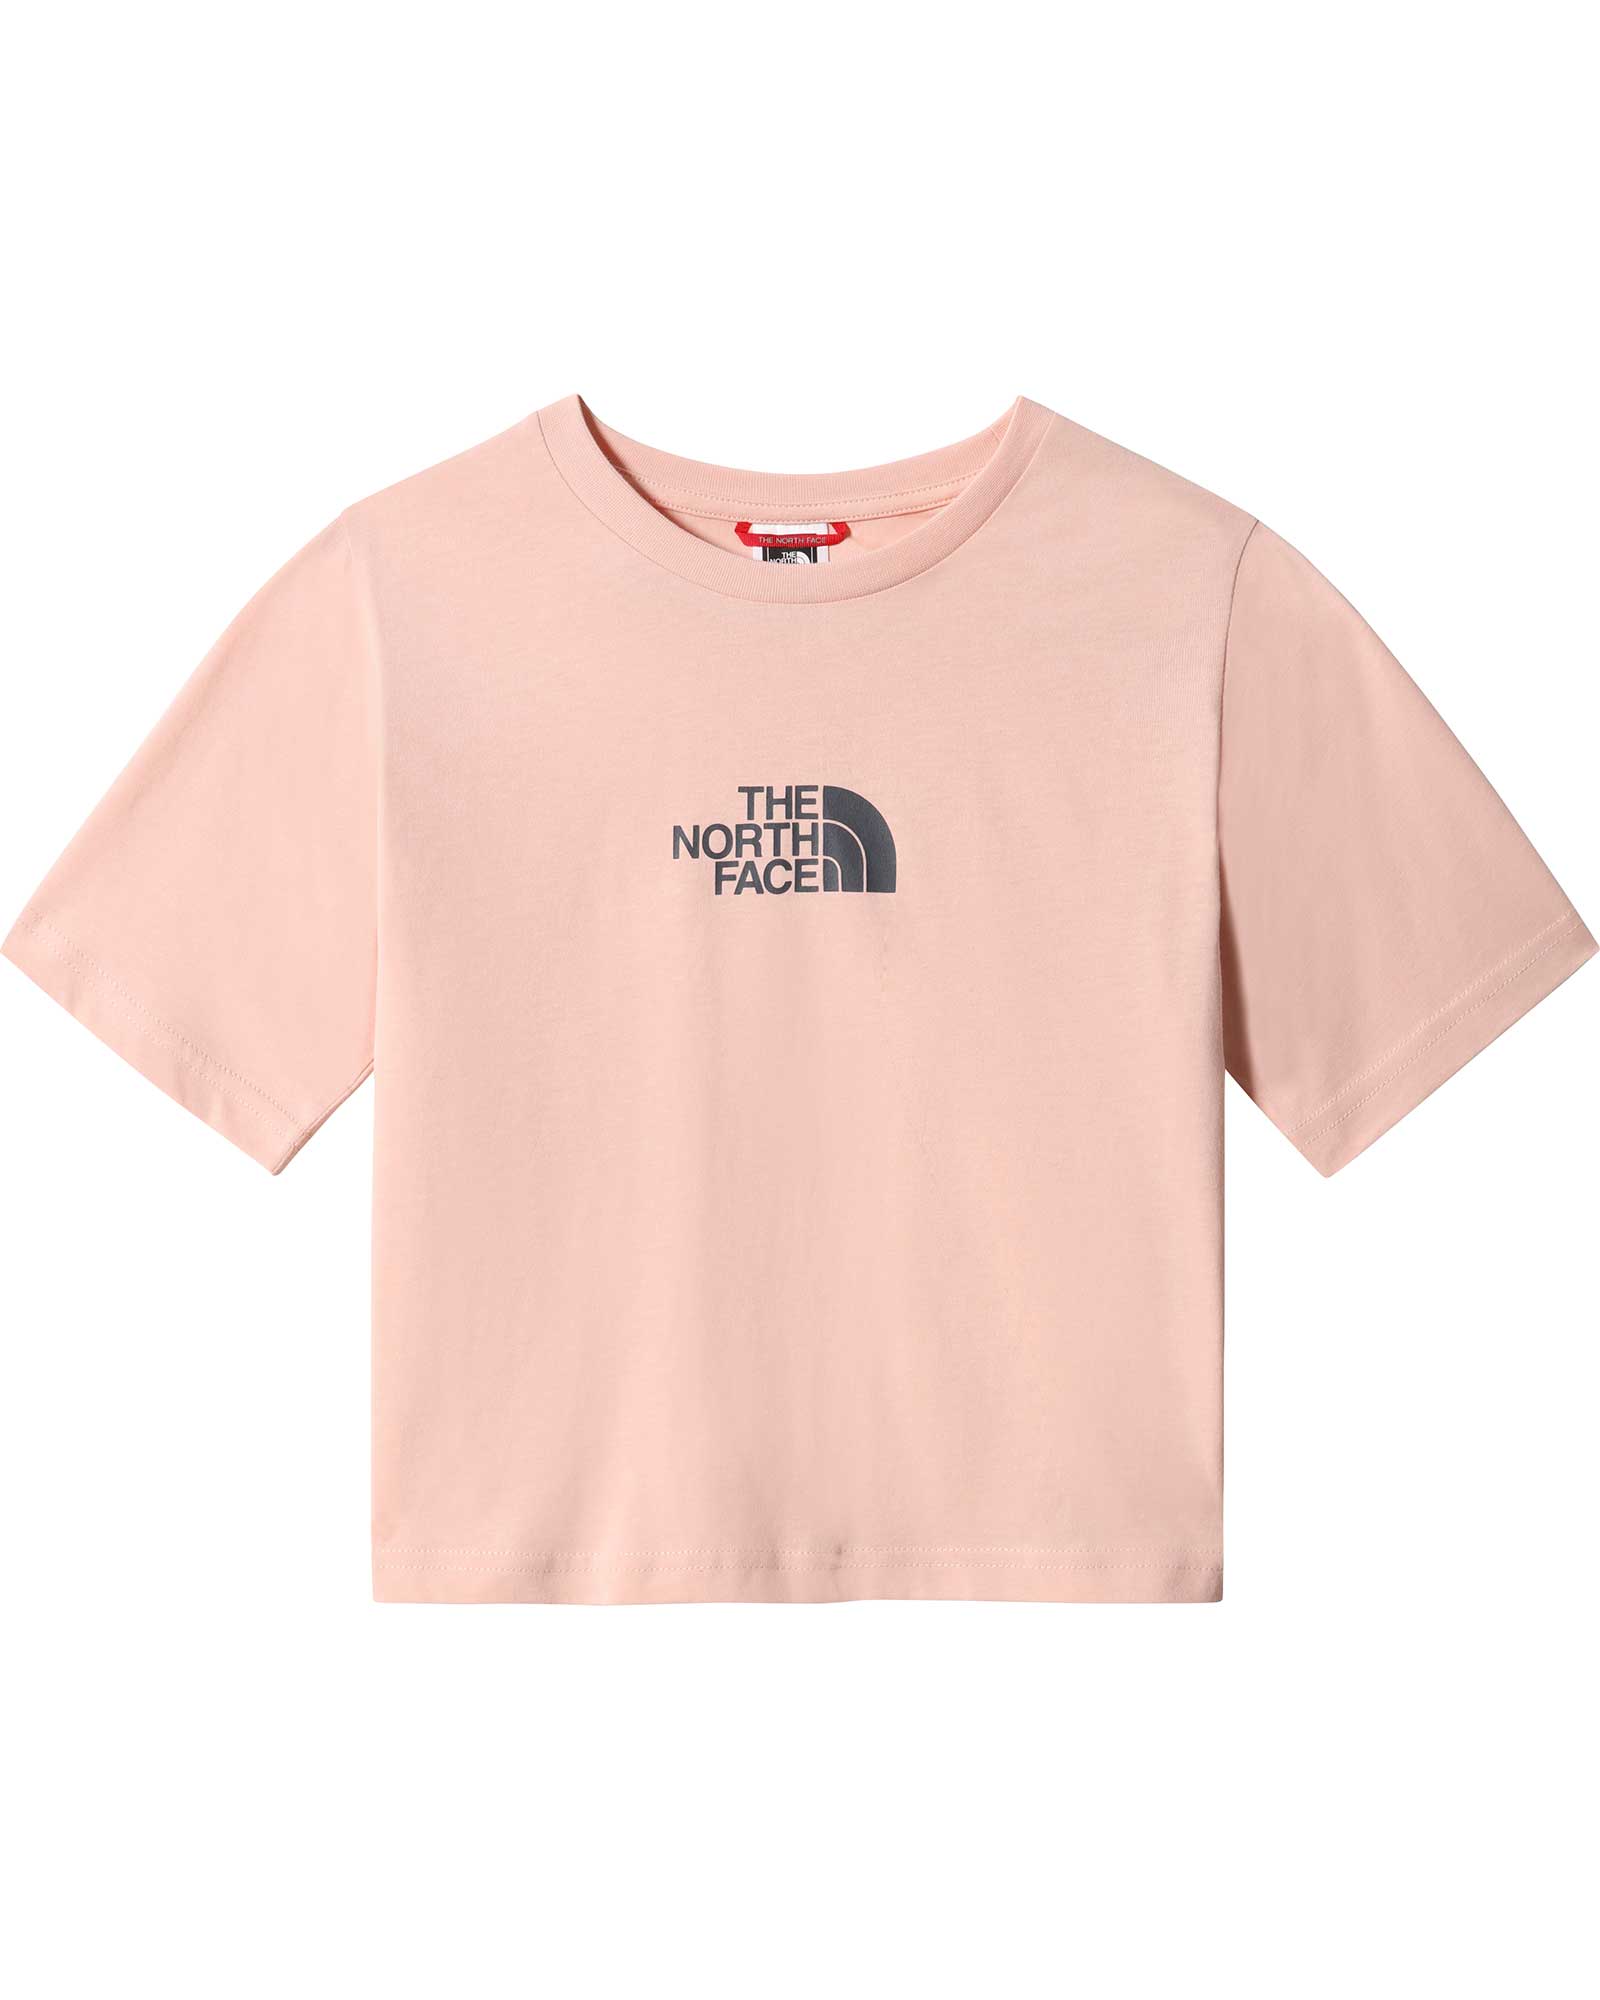 Product image of The North Face Cropped Graphic Girls' T-Shirt XL